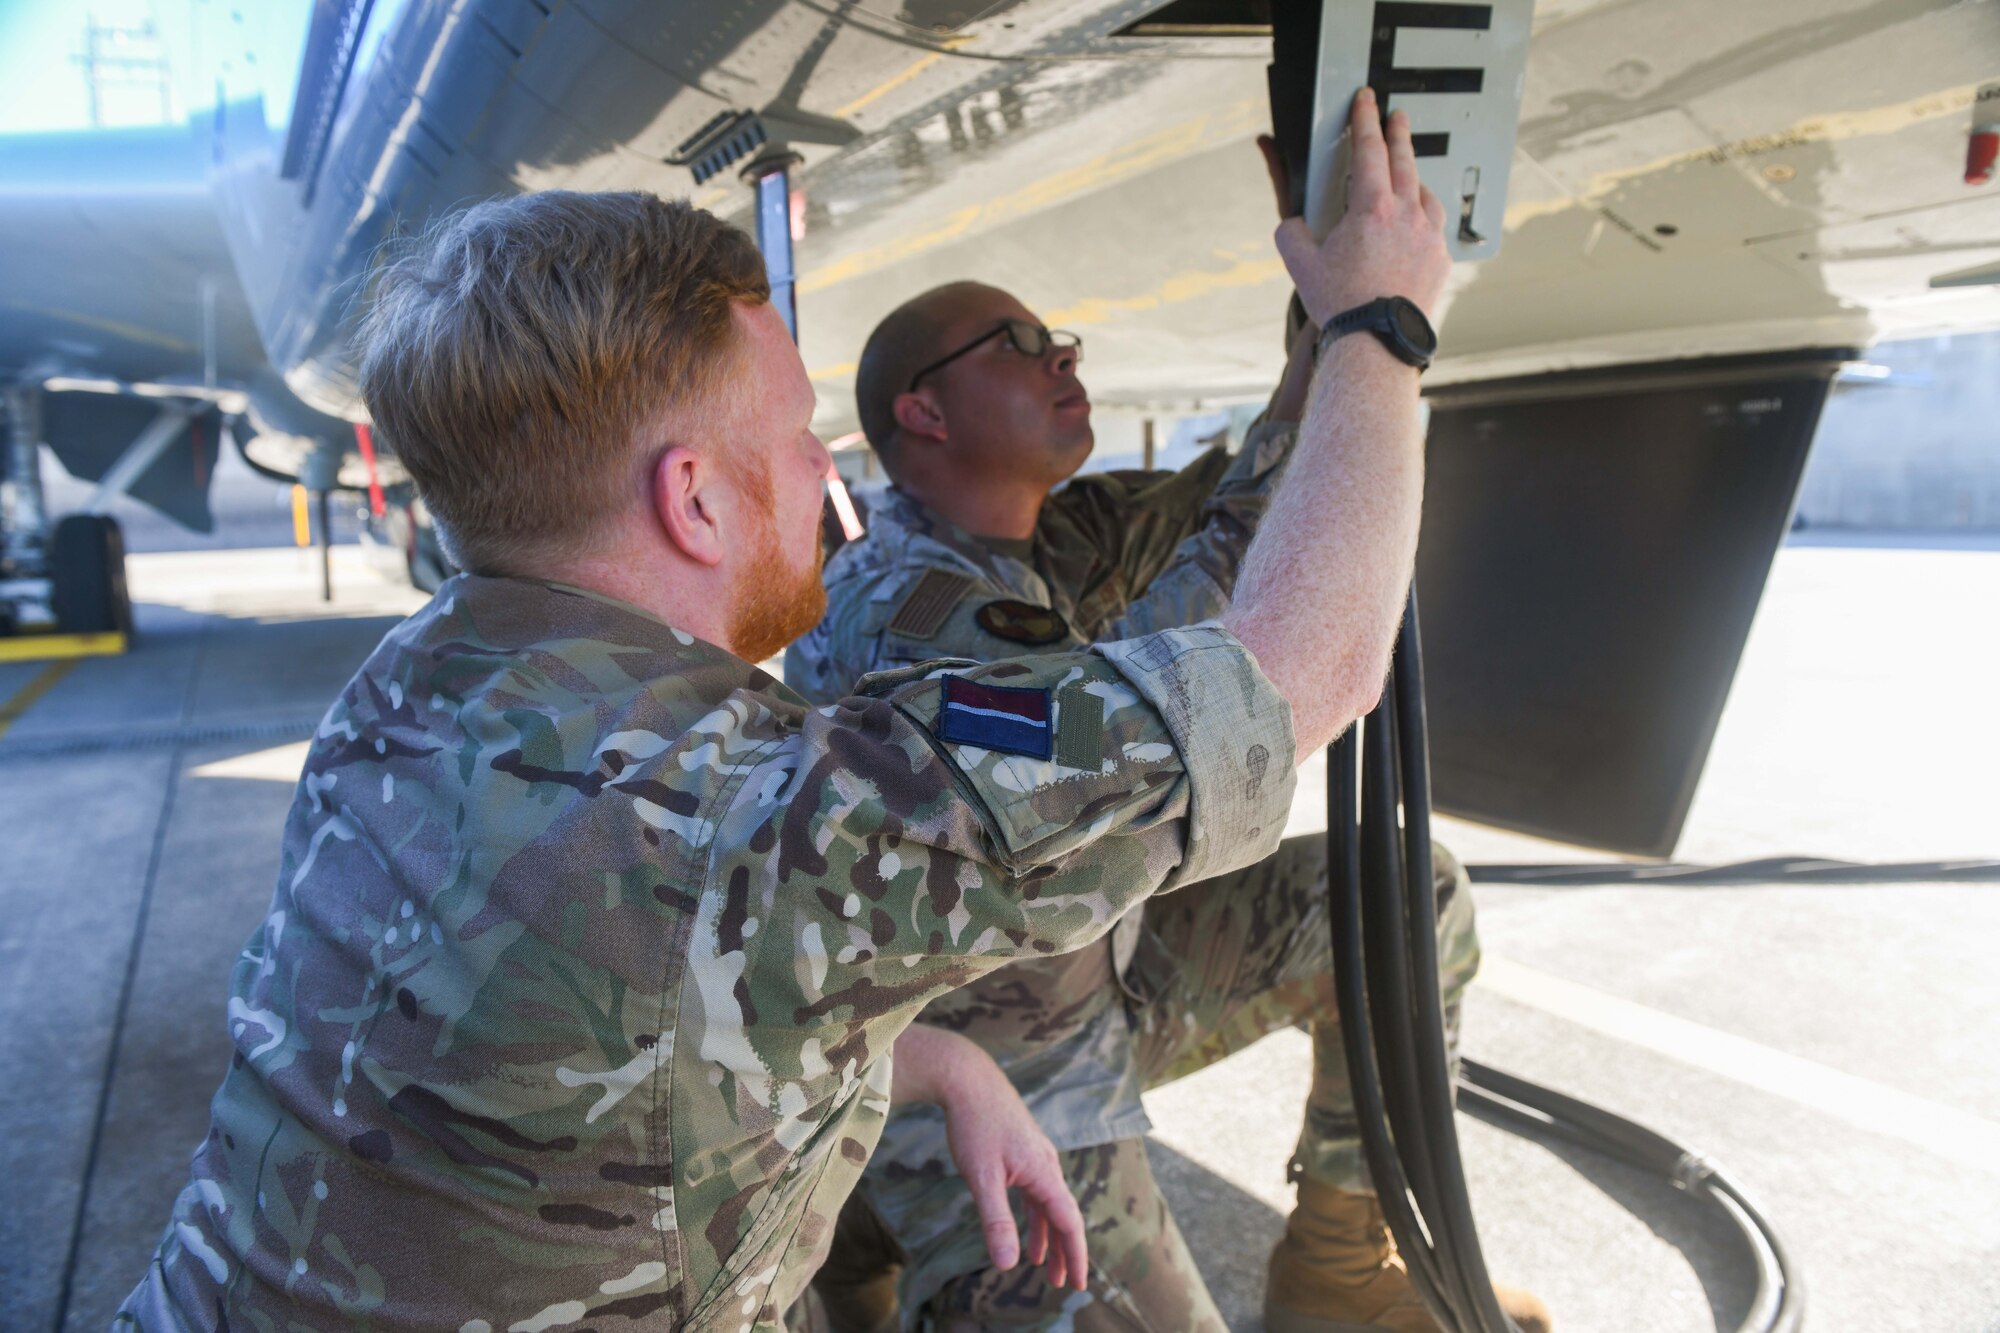 Airman and aviator hook a power source to an aircraft.